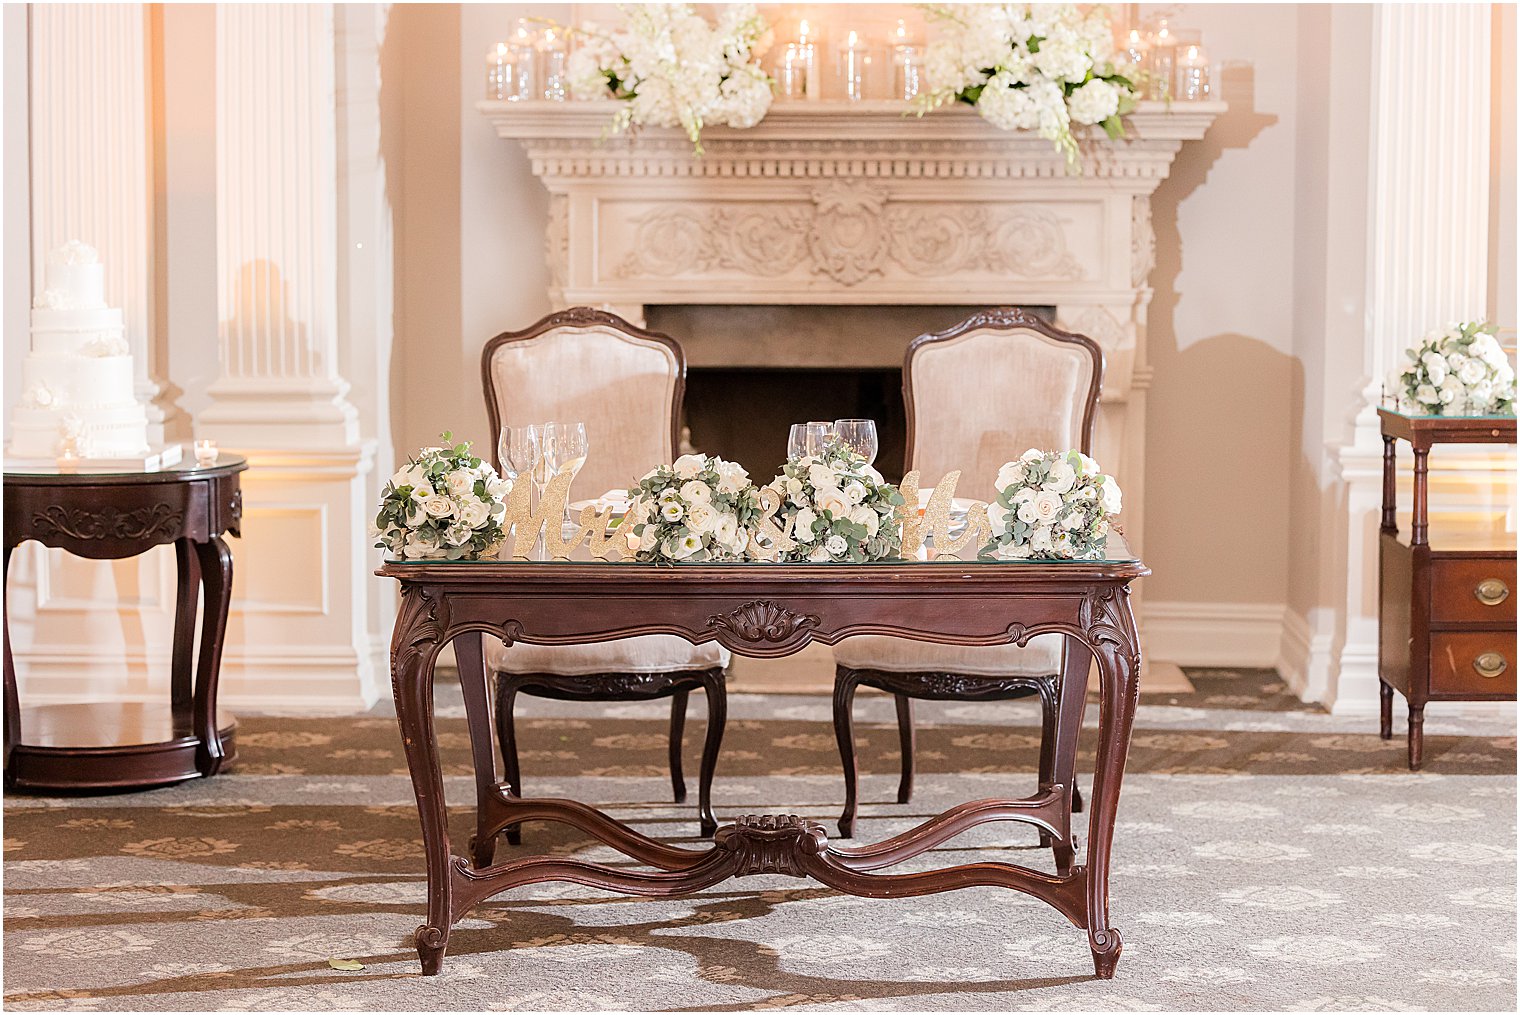 sweetheart table by fireplace at Park Savoy Estate with white roses